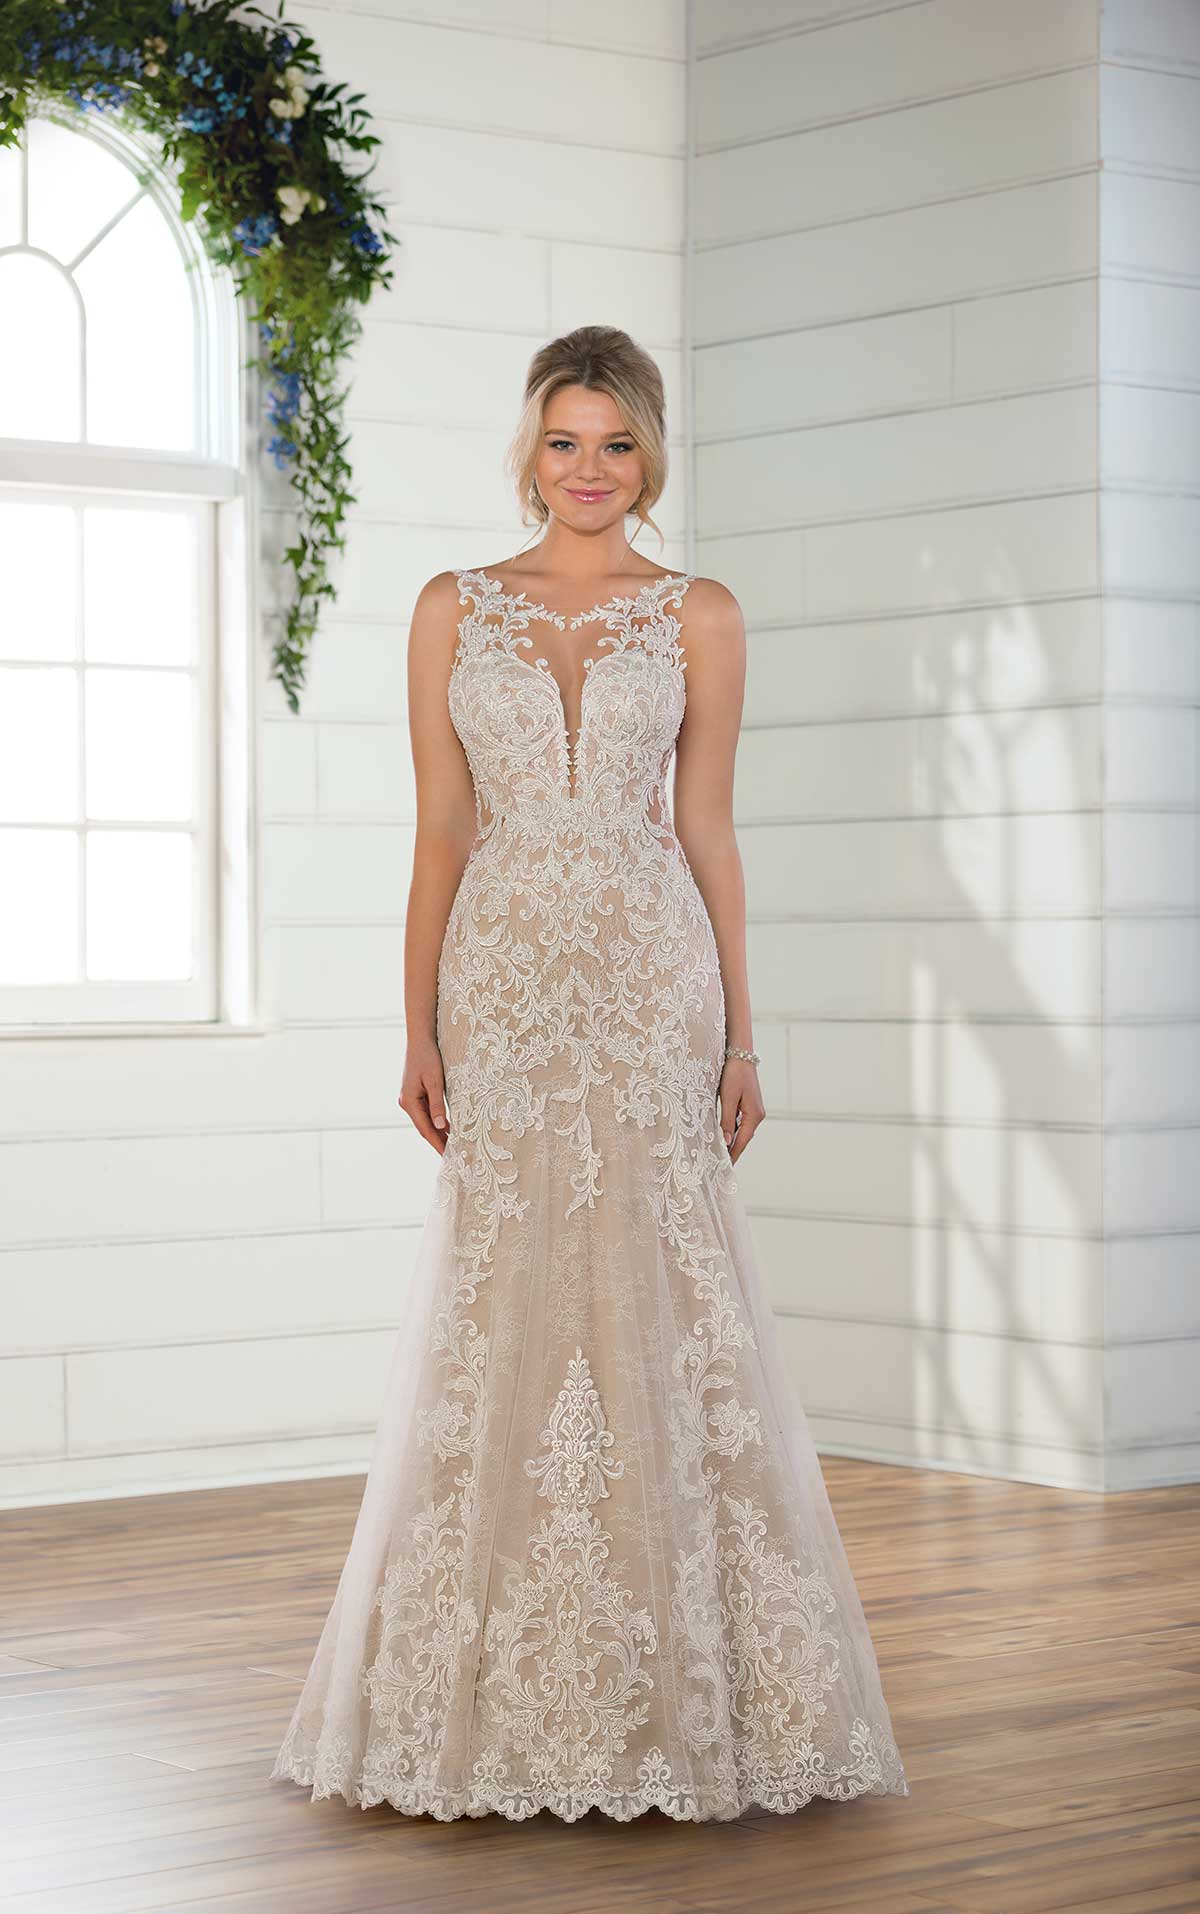 Sleeveless Illusion High Neckline Lace Fit And Flare Wedding Dress by Essense of Australia - Image 1